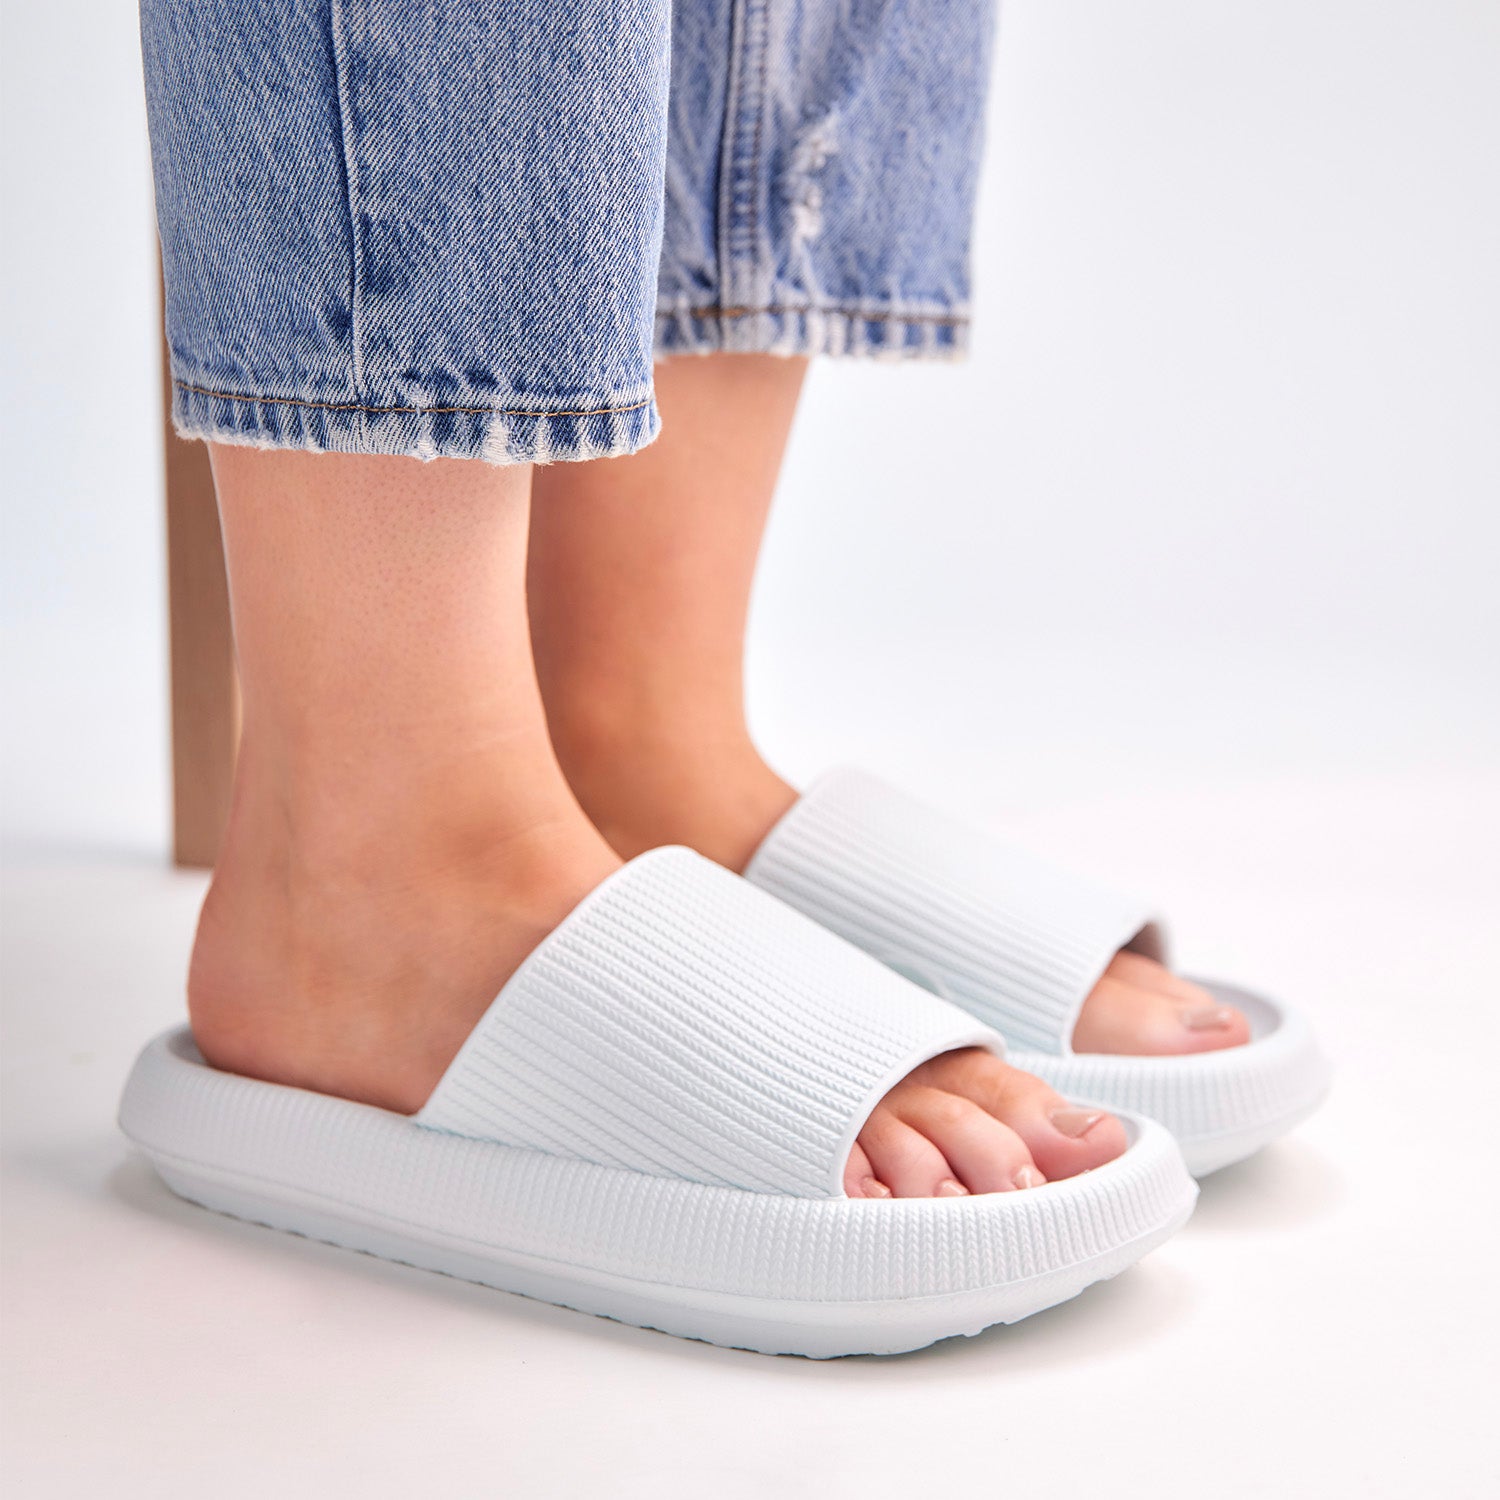 These Slide Sandals With 7,200+ Perfect Ratings Start at Just $14